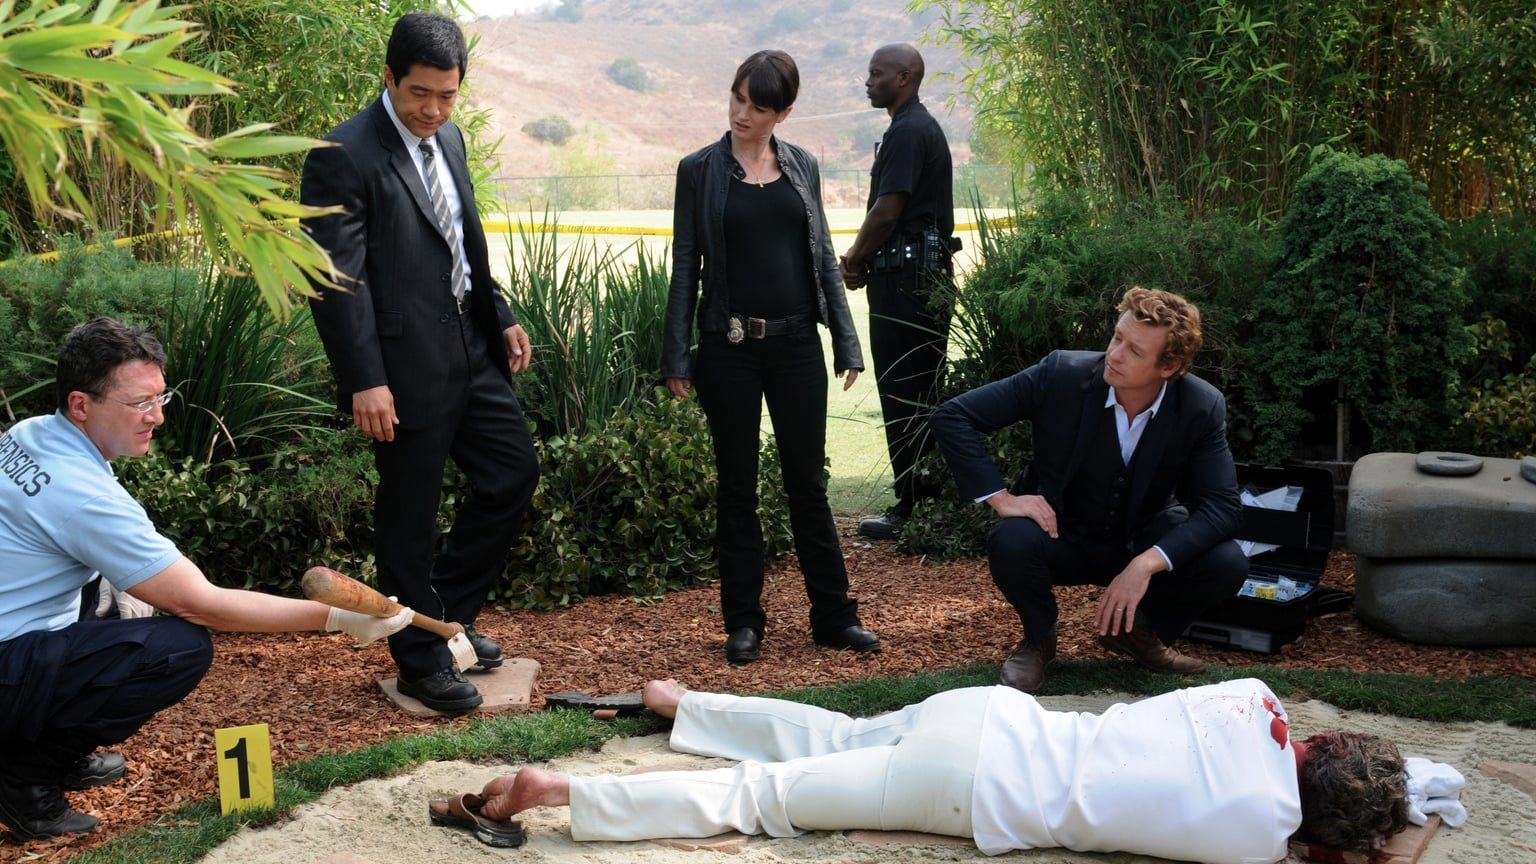 Throwing Fire The Mentalist S02e10 Tvmaze